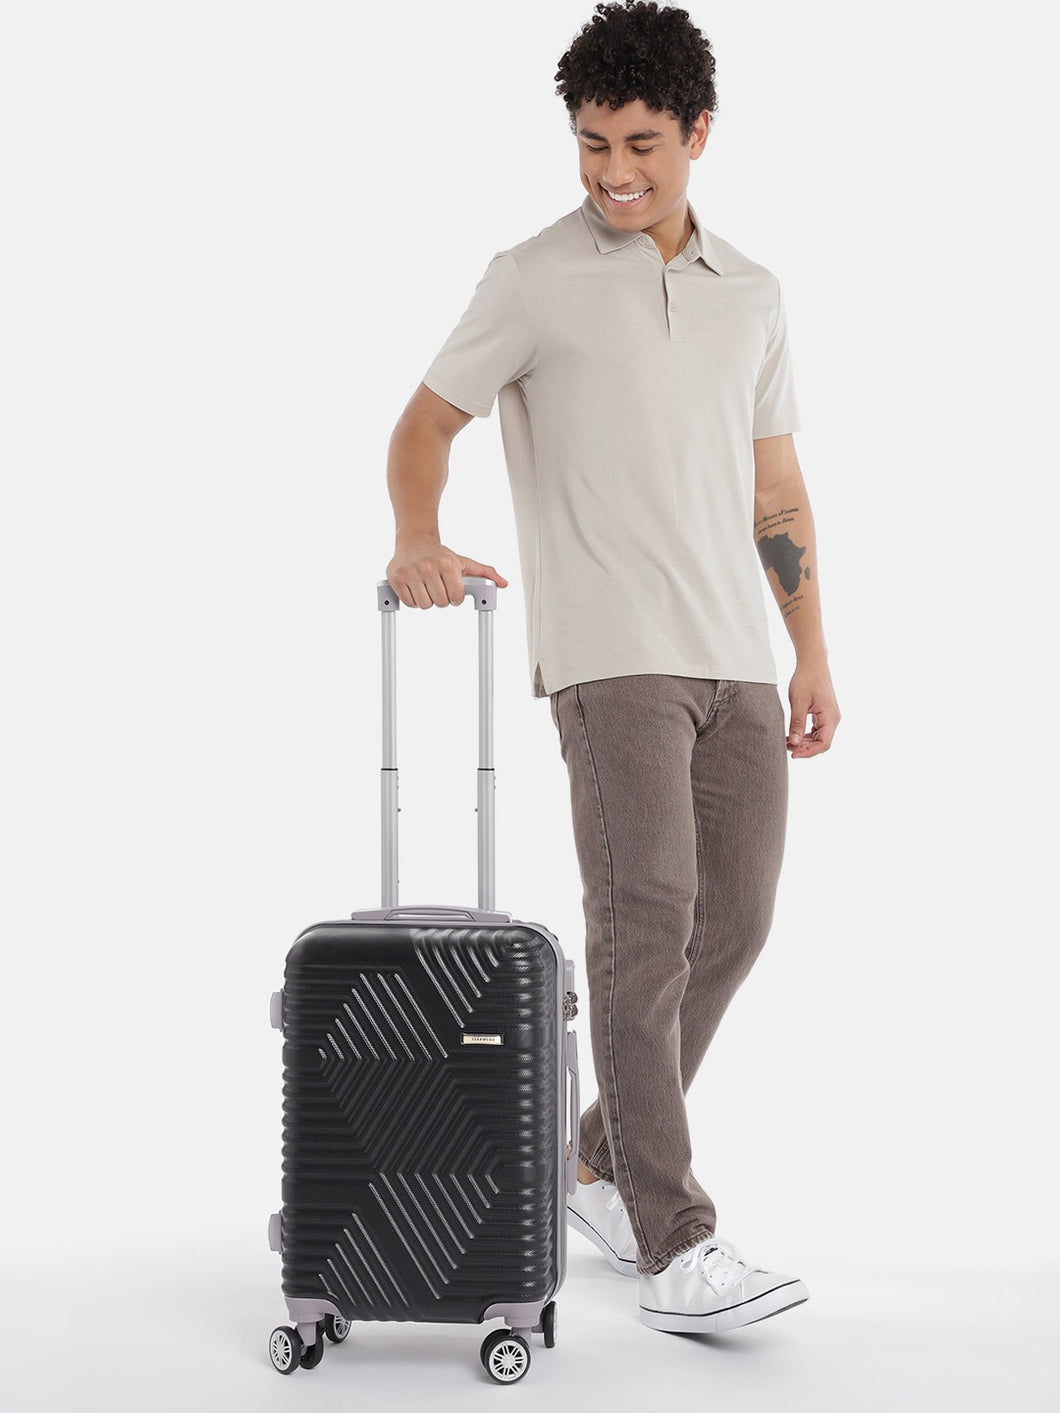 Black-Toned Textured Hard-Sided Cabin Trolley Suitcase